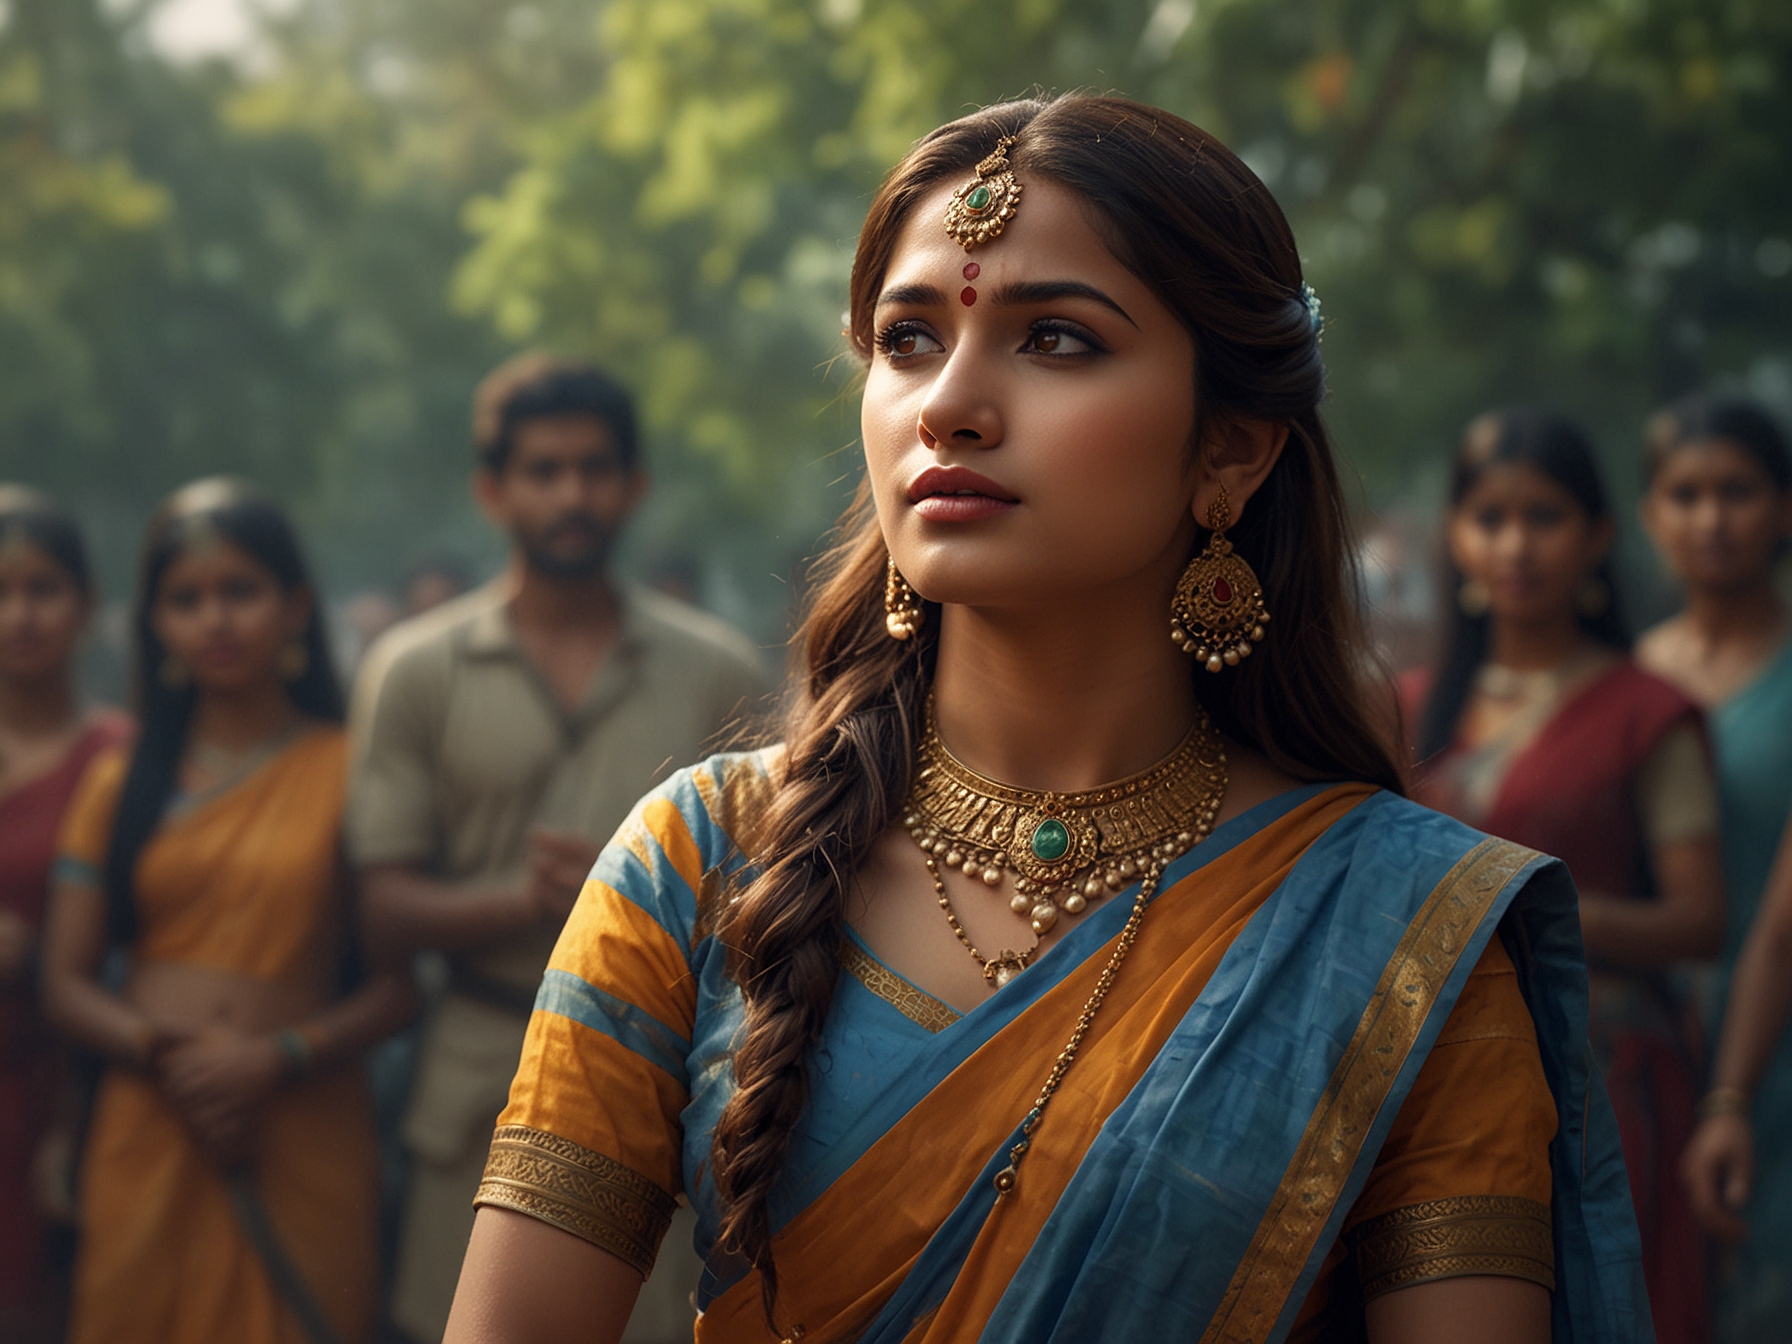 Subha Rajput, dressed as Parvati, skillfully portrays emotions in a scene from 'Shiv Shakti Tap Tyaag Aur Tandav,' showcasing her acclaimed performance in the Colors TV series.